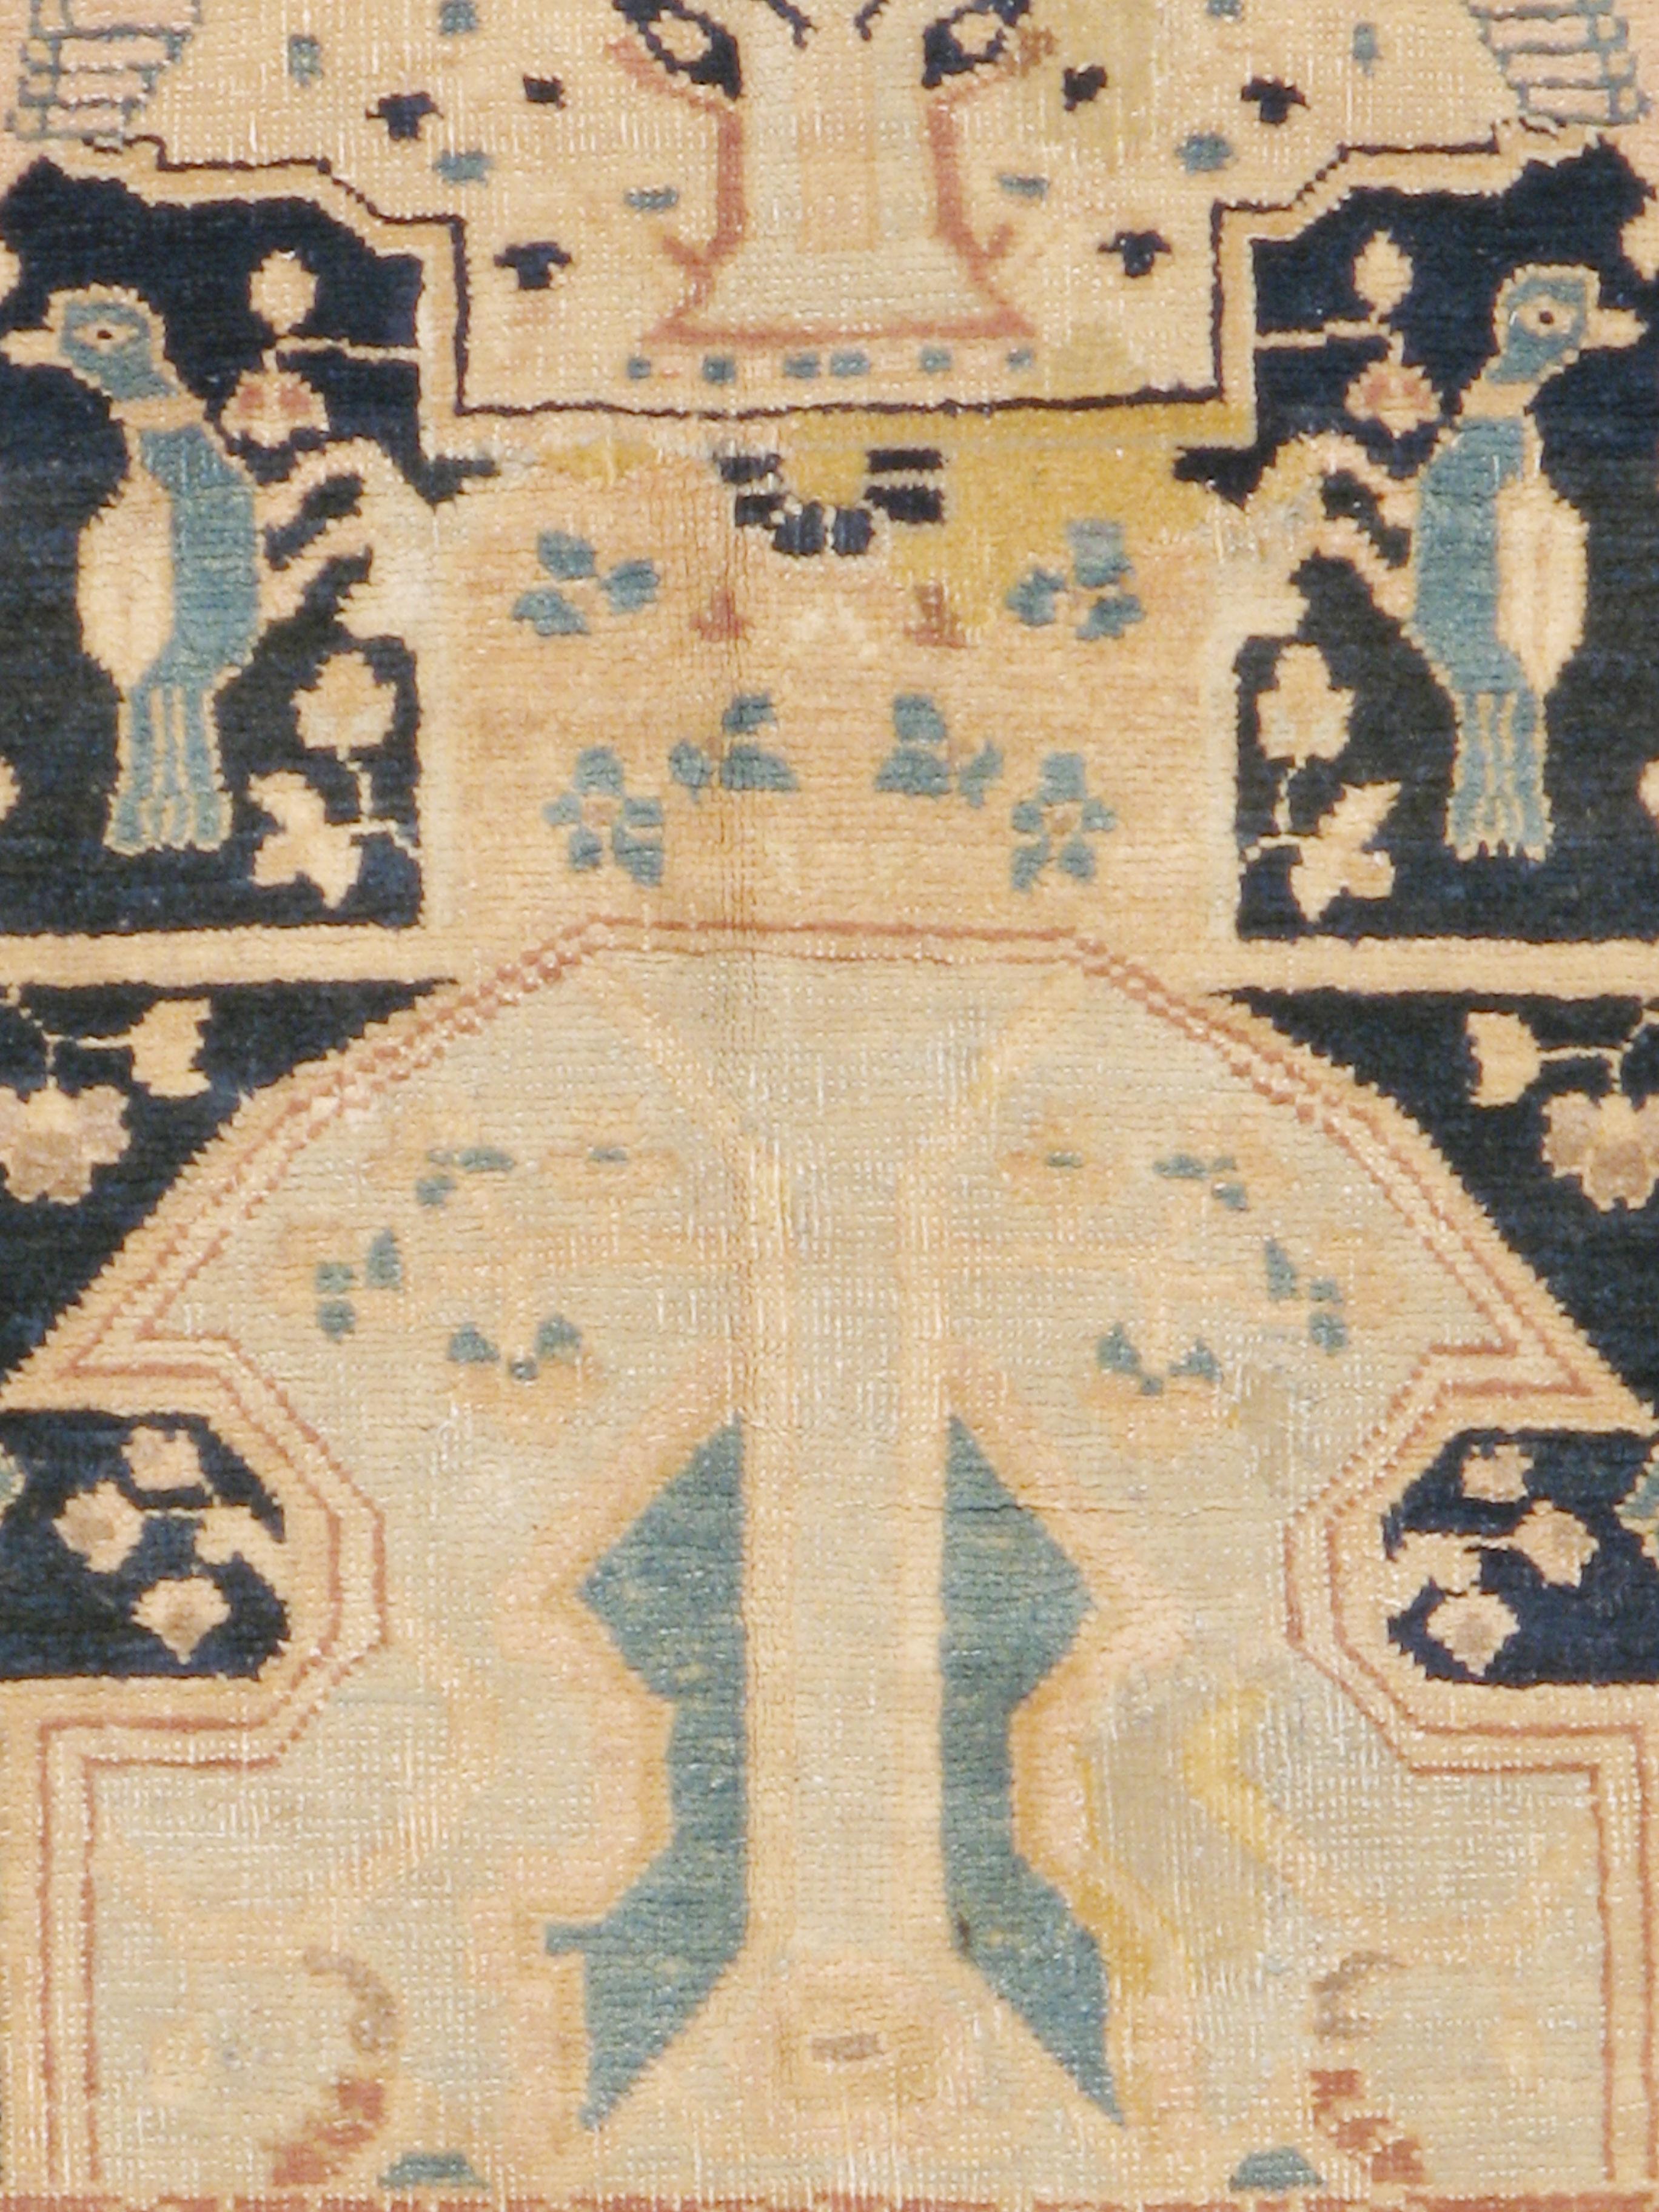 An antique Persian Tabriz rug from the late 19th century. Dated 1304 (1887) and inscribed, this extremely rare Tabriz scatter displays a central beige cartouche gripped by four human hands emerging from angular arabesques, all on a blue-black